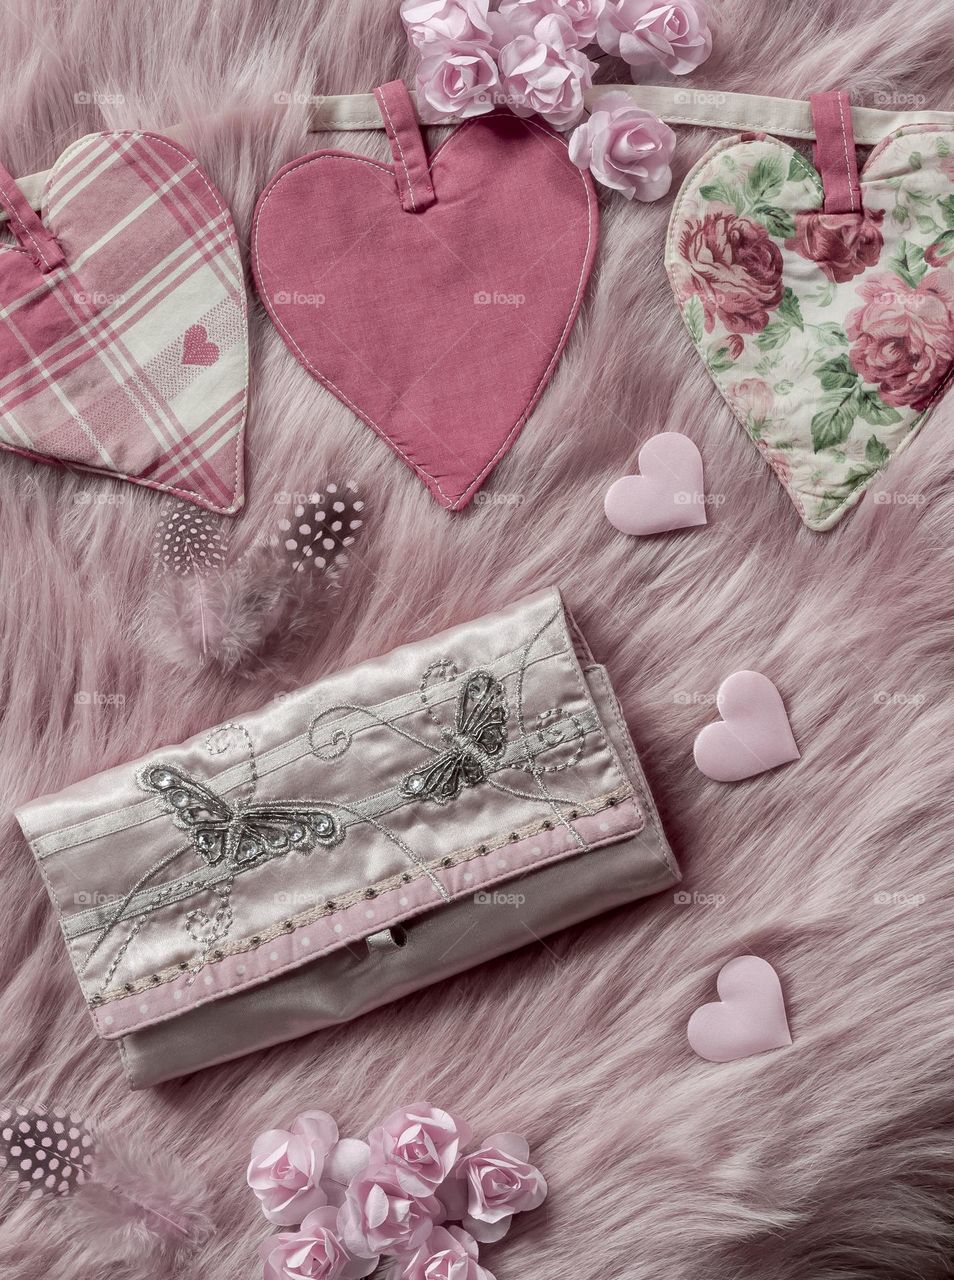 Soft pink flat lay of hearts, paper roses and feathers with satin clutch bag